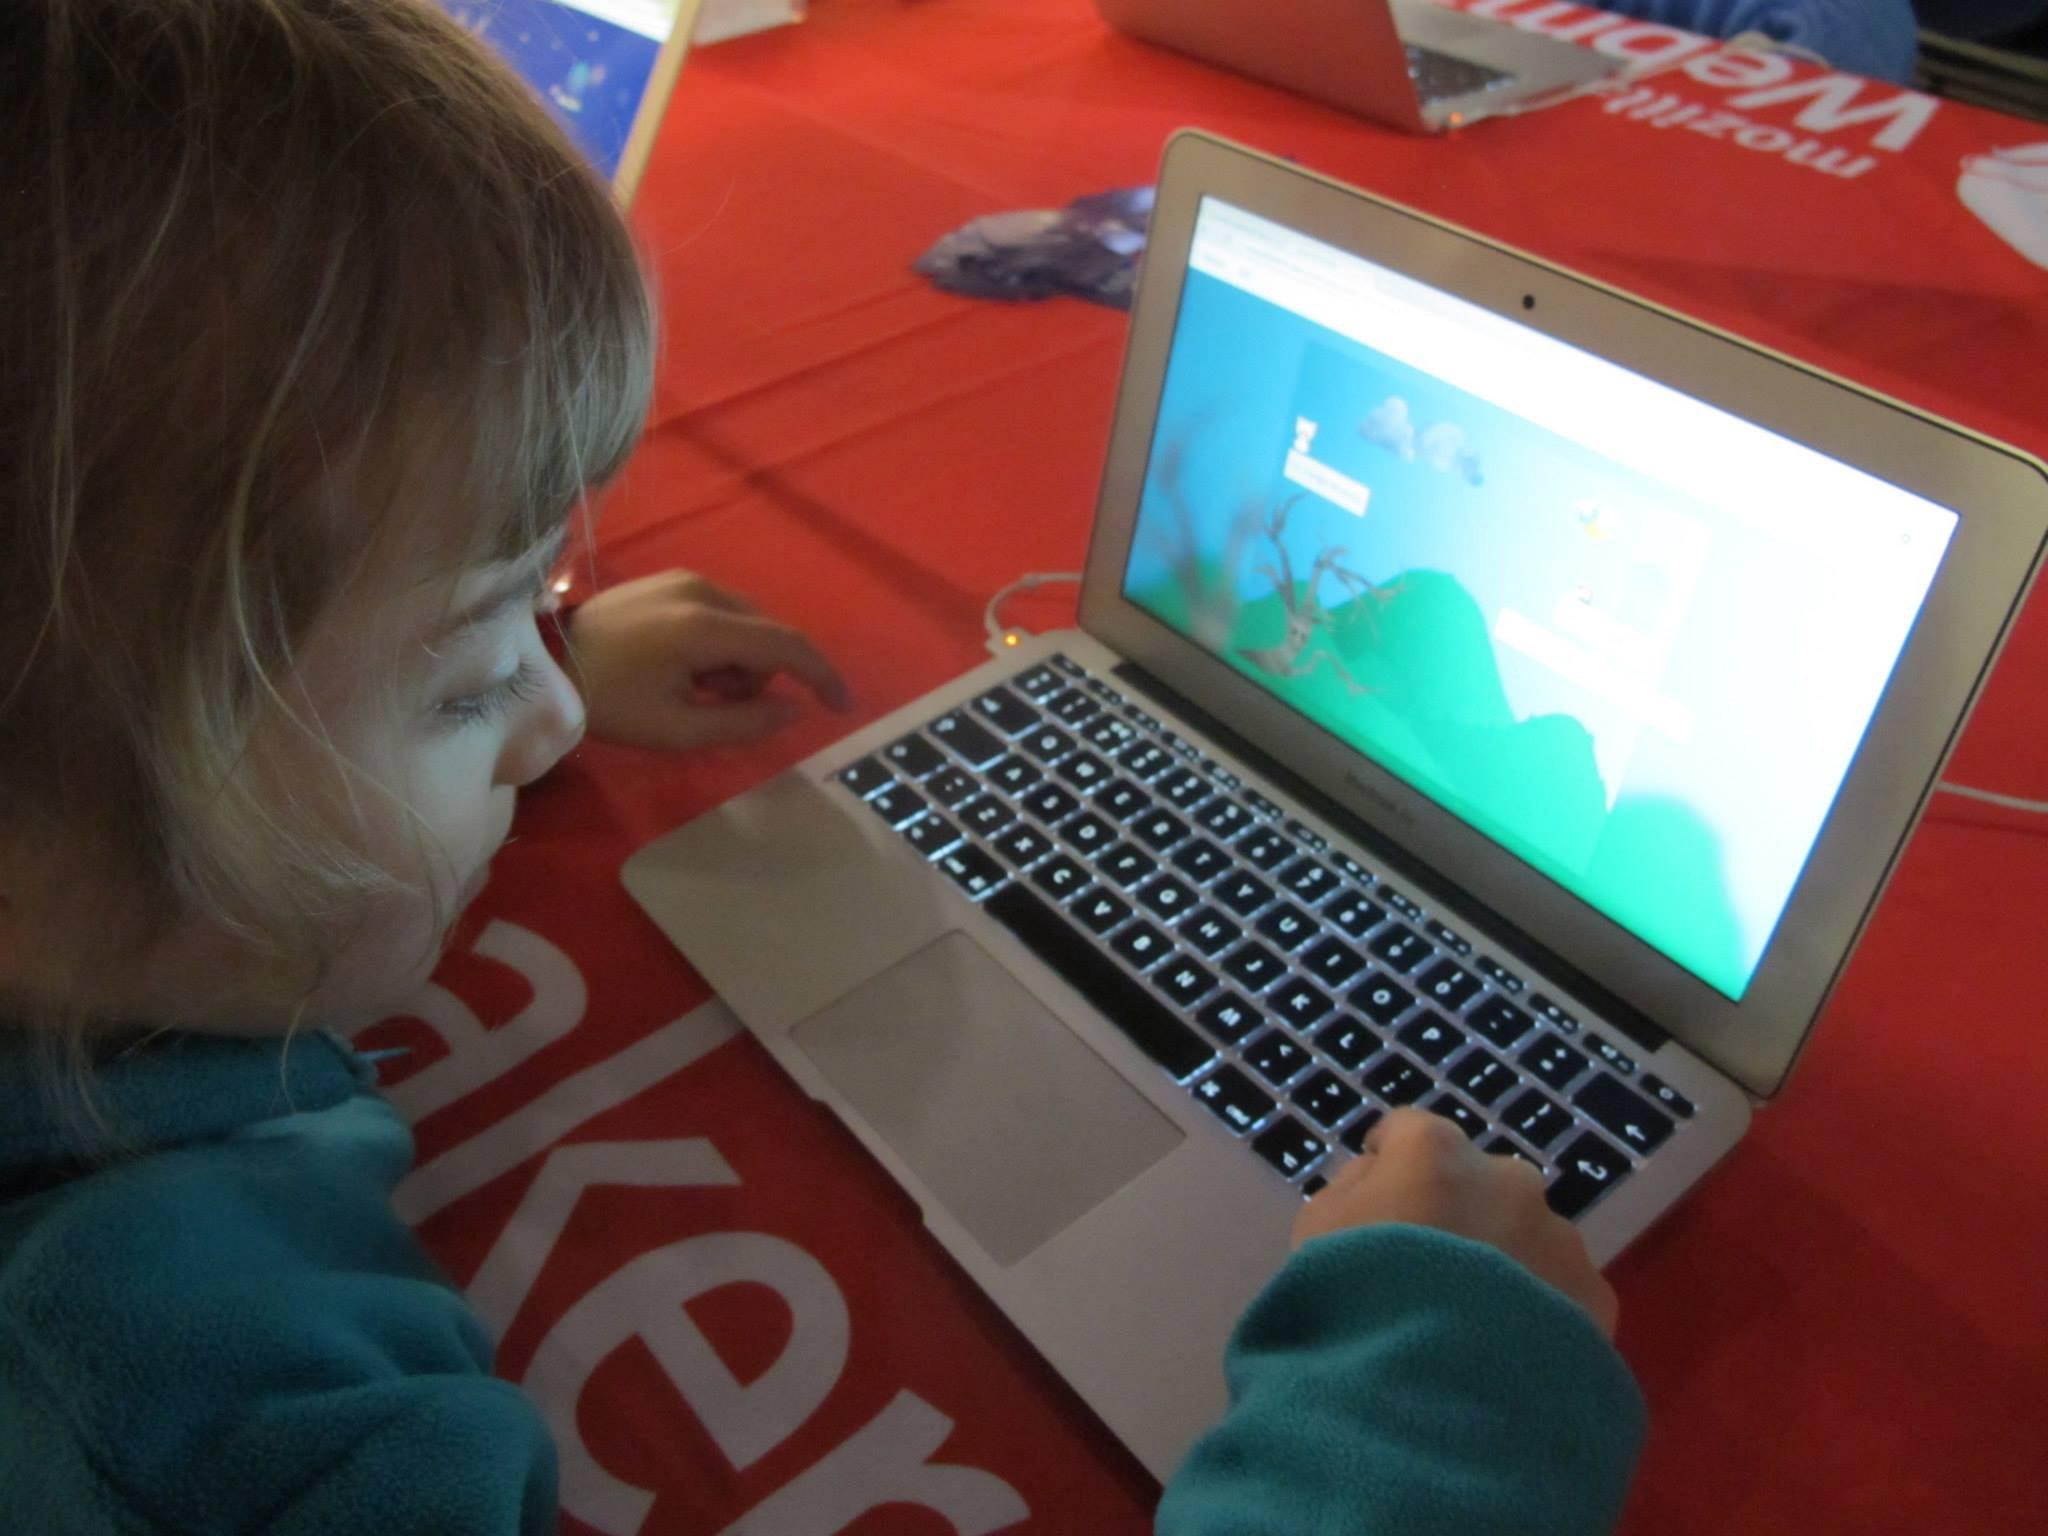 Apps like Erase All Kittens teach children coding and other skills through fun games